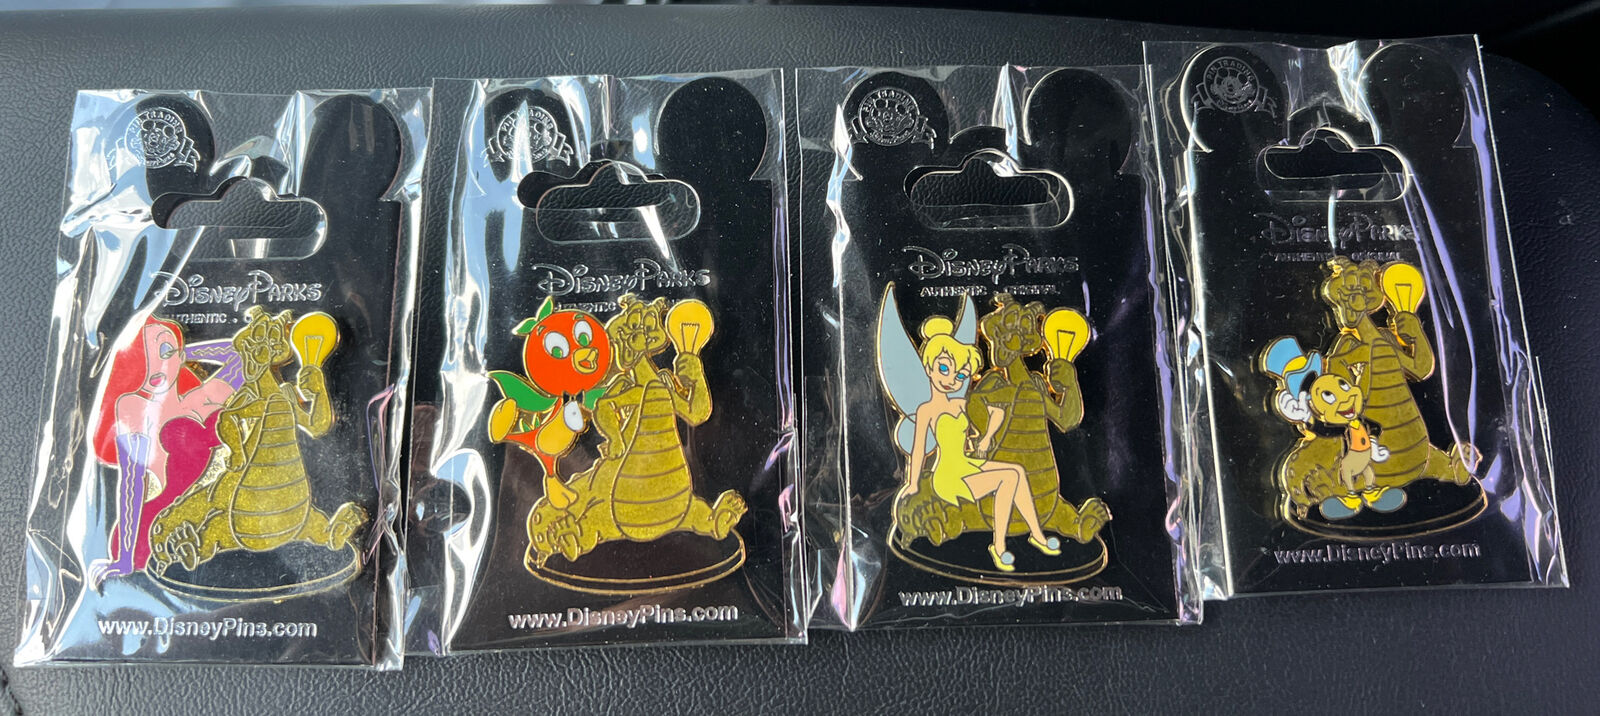 Lot 4 pins 2014~Disney WDW Imagination Gala Pin Event~Exclusive LE 1000